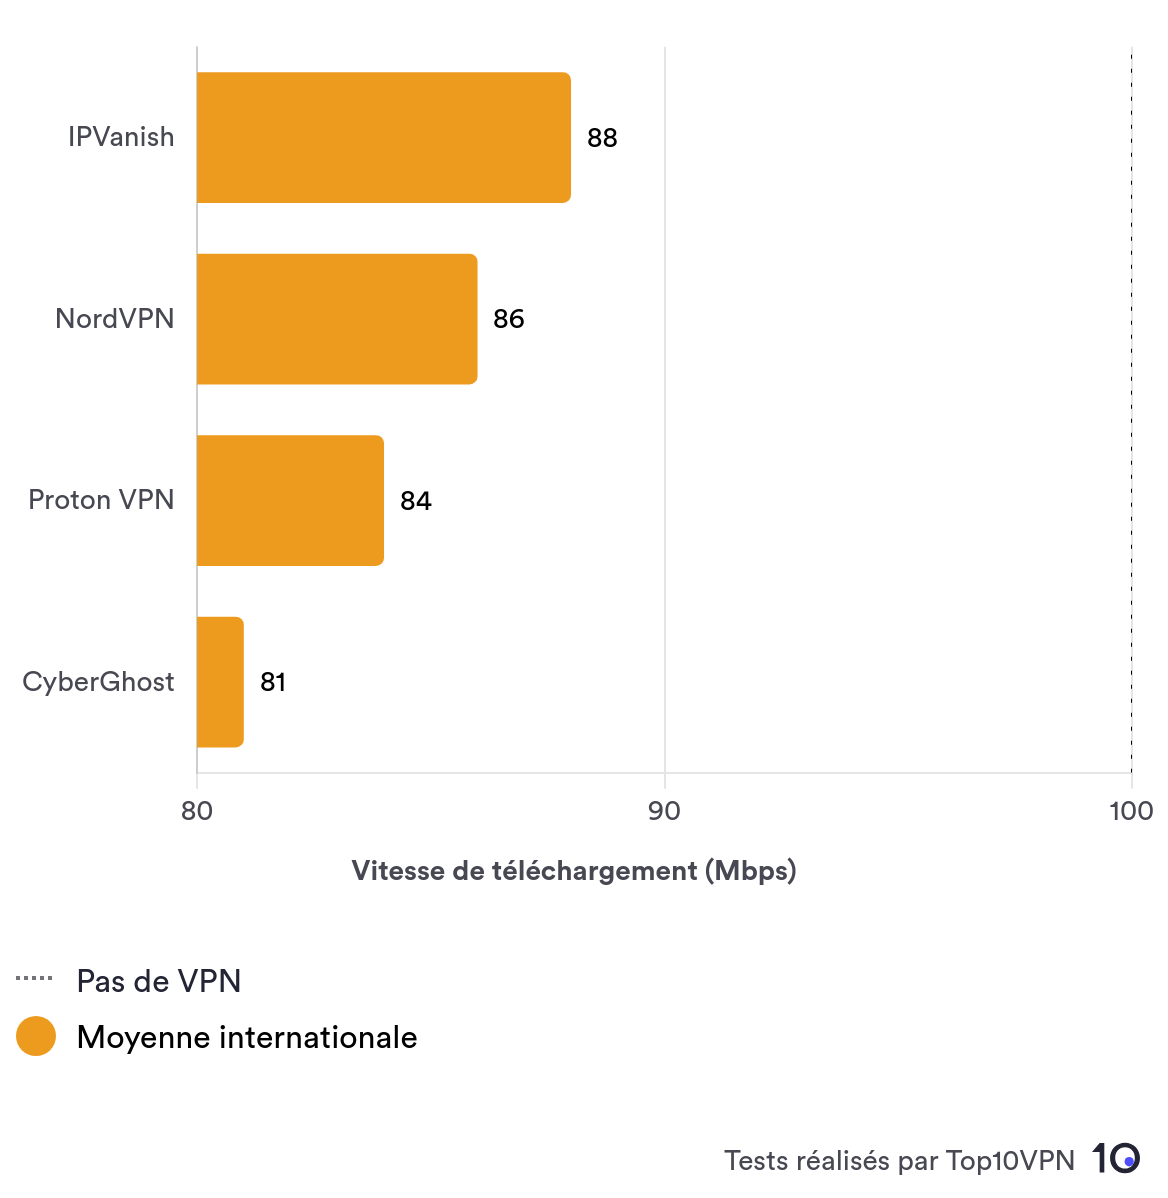 Comparison bar chart showing IPVanish's average international speed performance against other top VPN services.